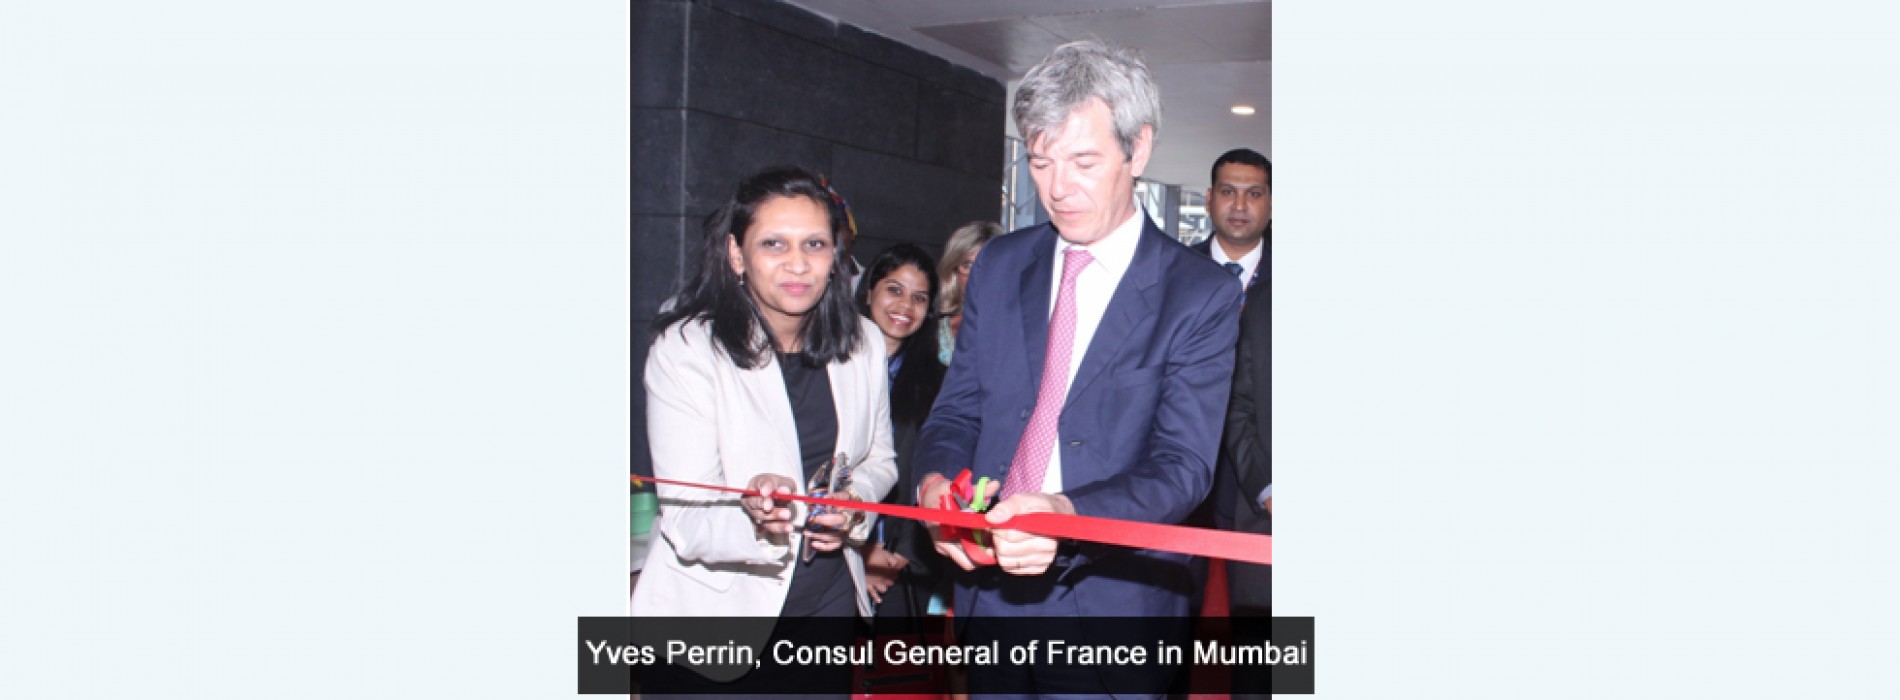 Consul General of France inaugurates France Visa Application Centre in Pune at spacious new premise serving multiple countries under one roof